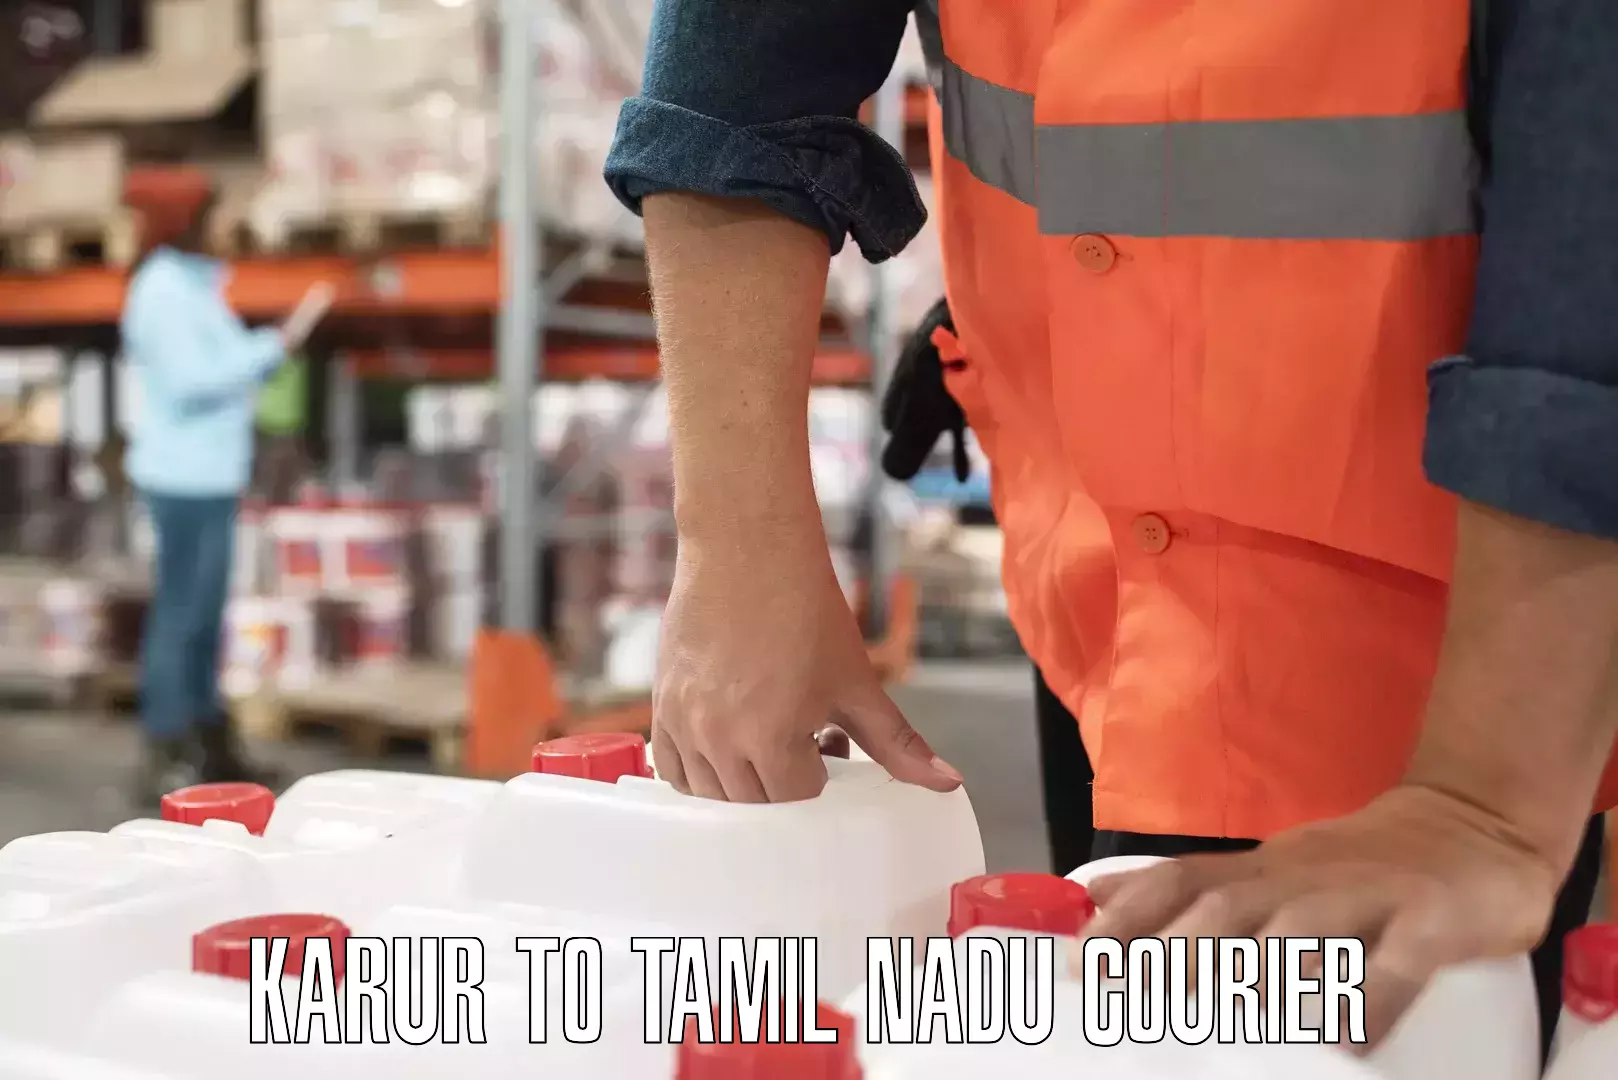 Easy access courier services Karur to Tiruchi